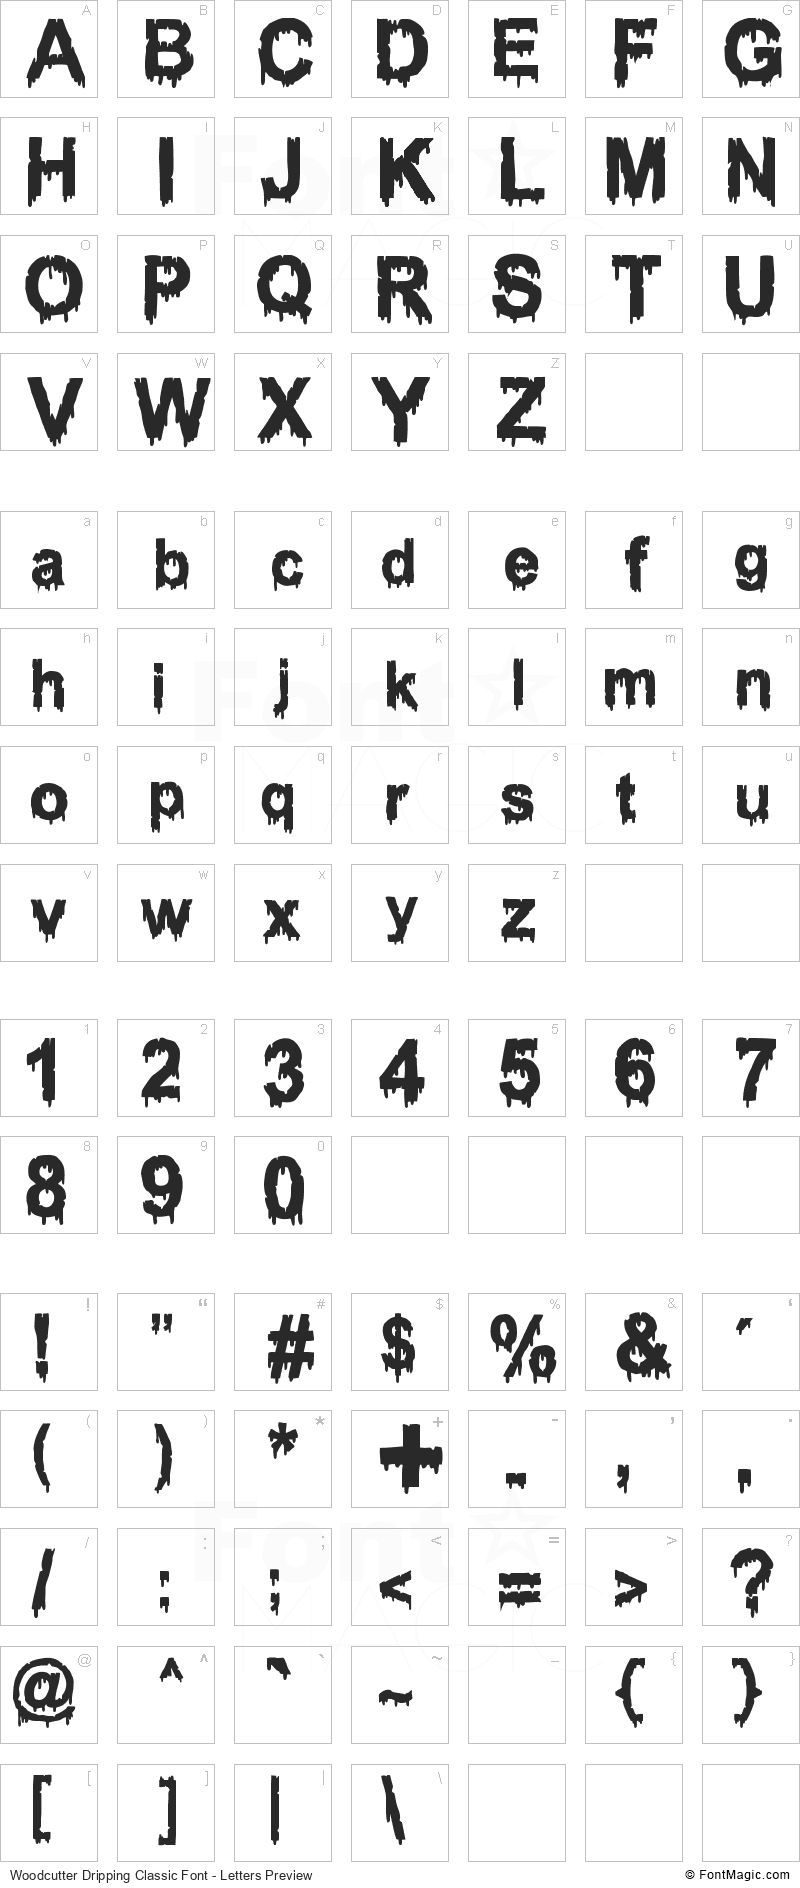 Woodcutter Dripping Classic Font - All Latters Preview Chart